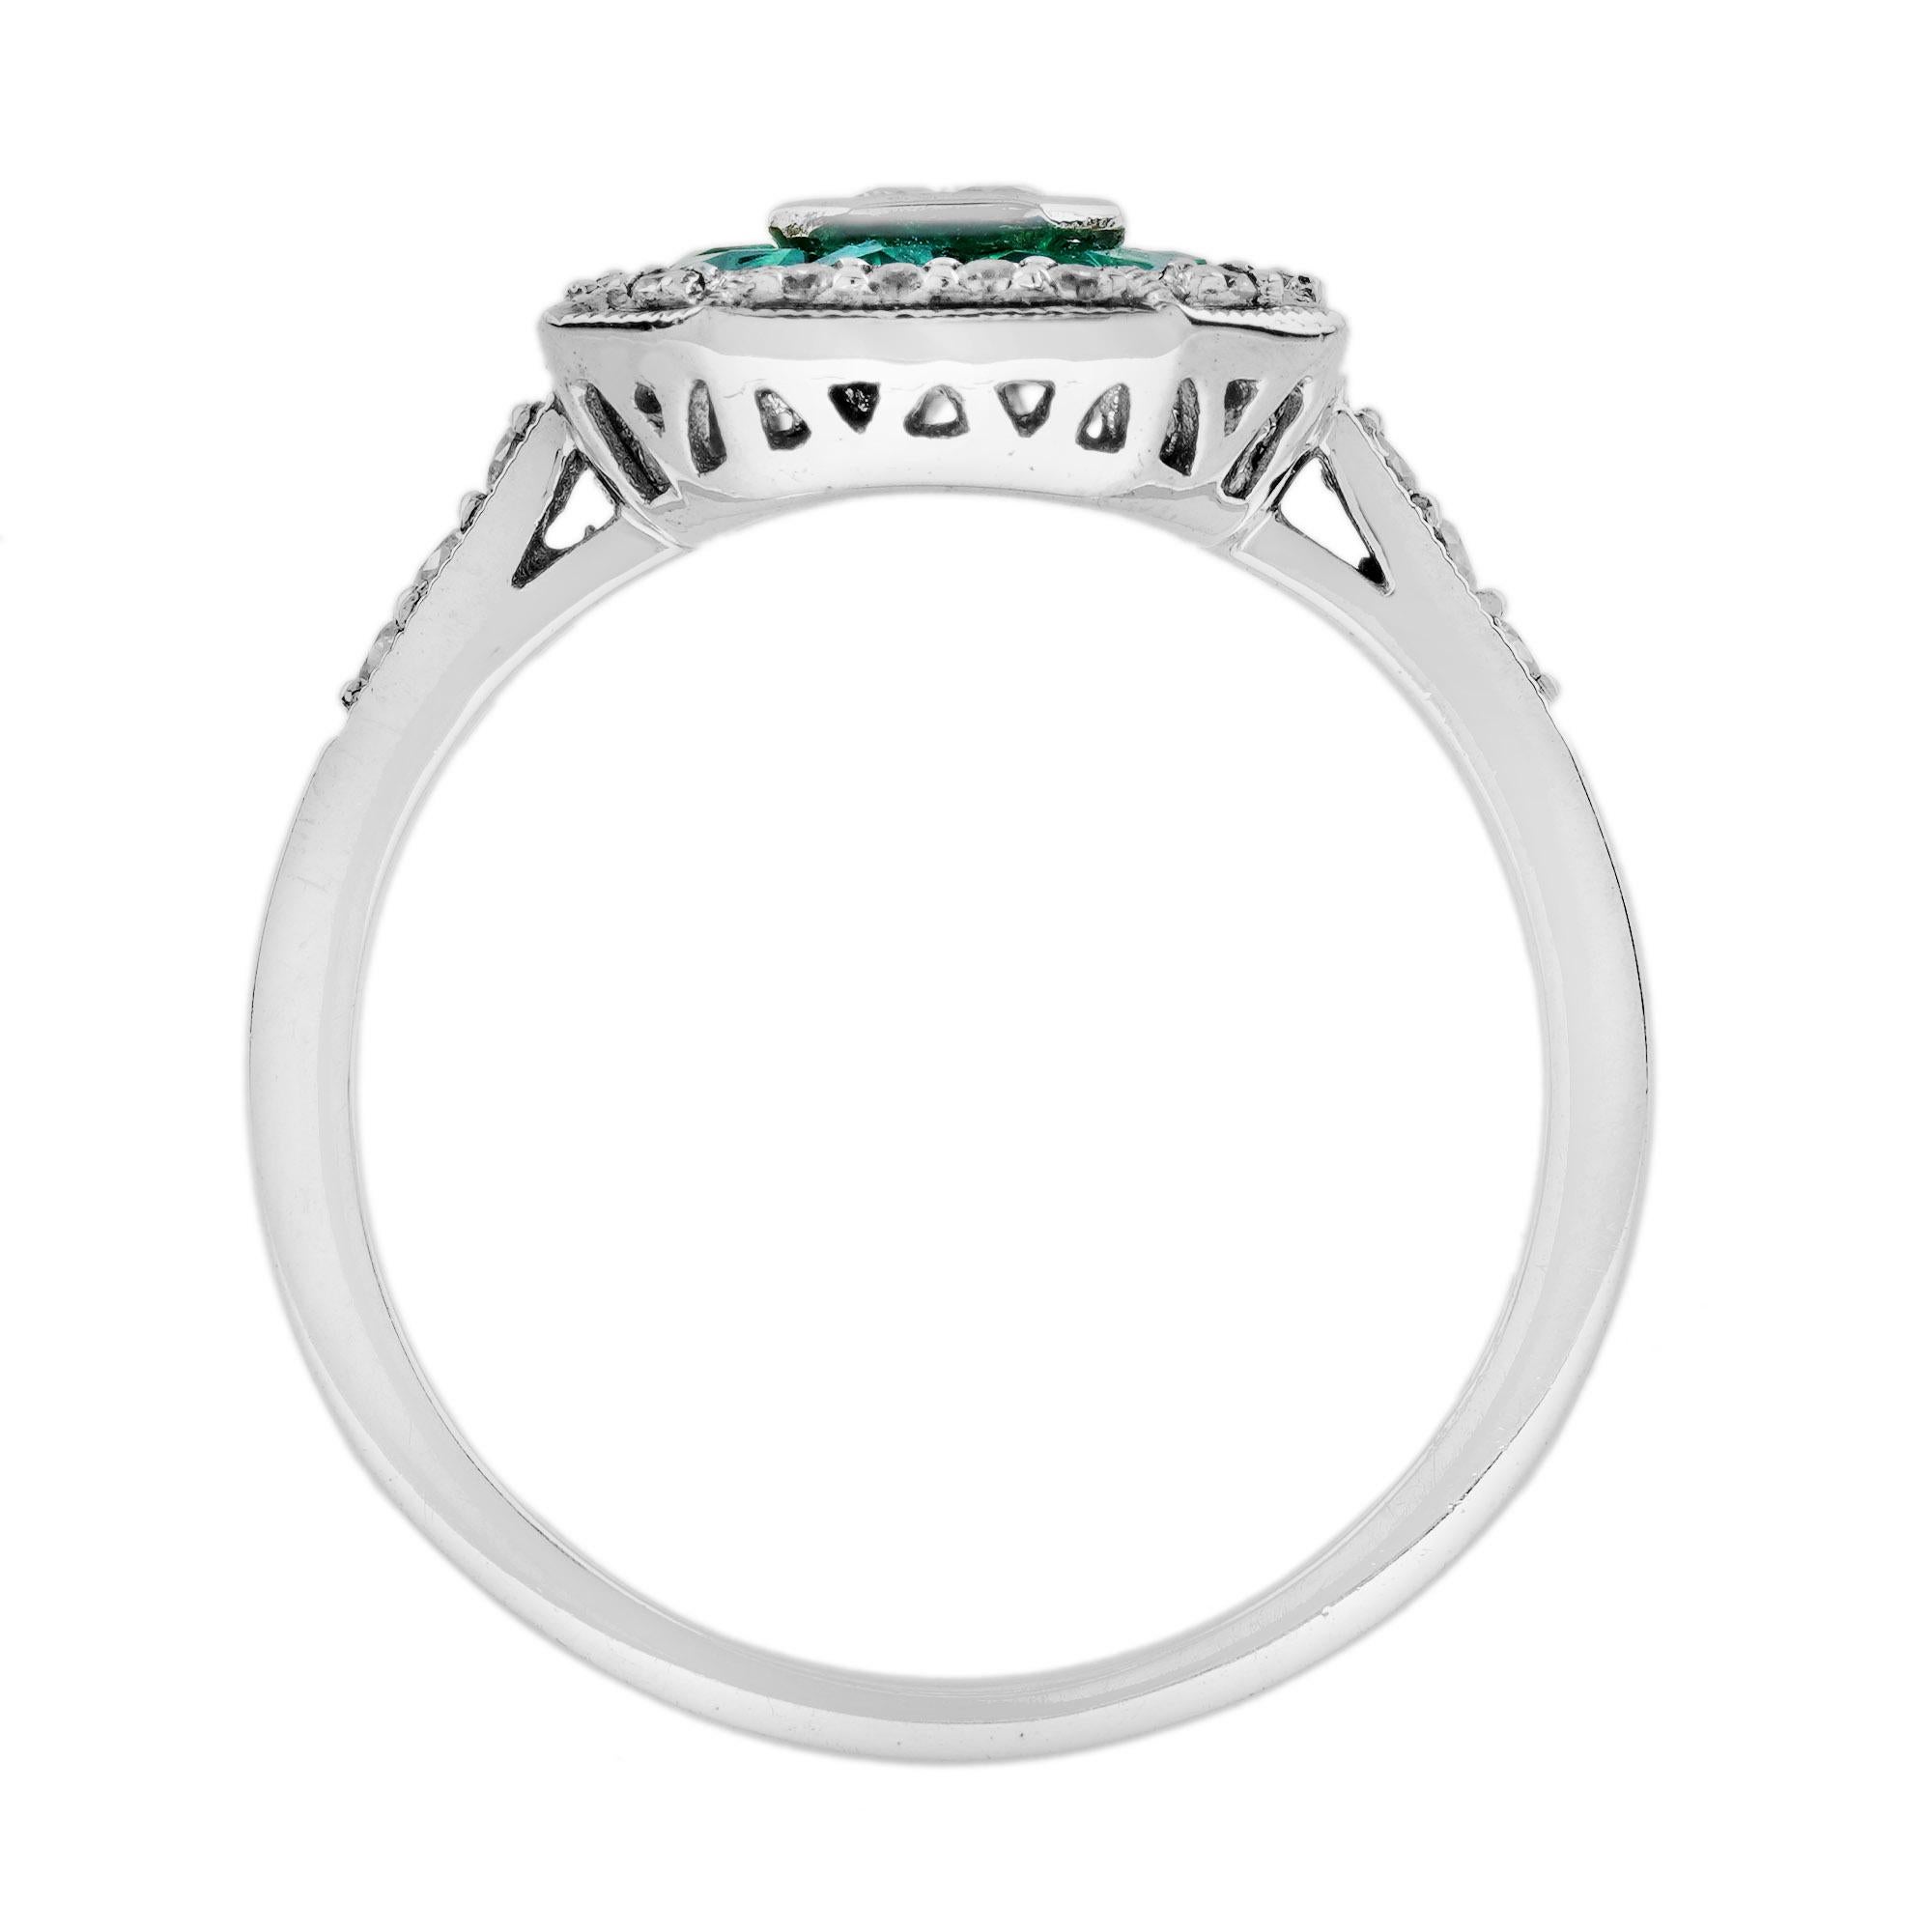 For Sale:  Diamond and Emerald Double Halo Art Deco Style Engagement Ring in 18K White Gold 6